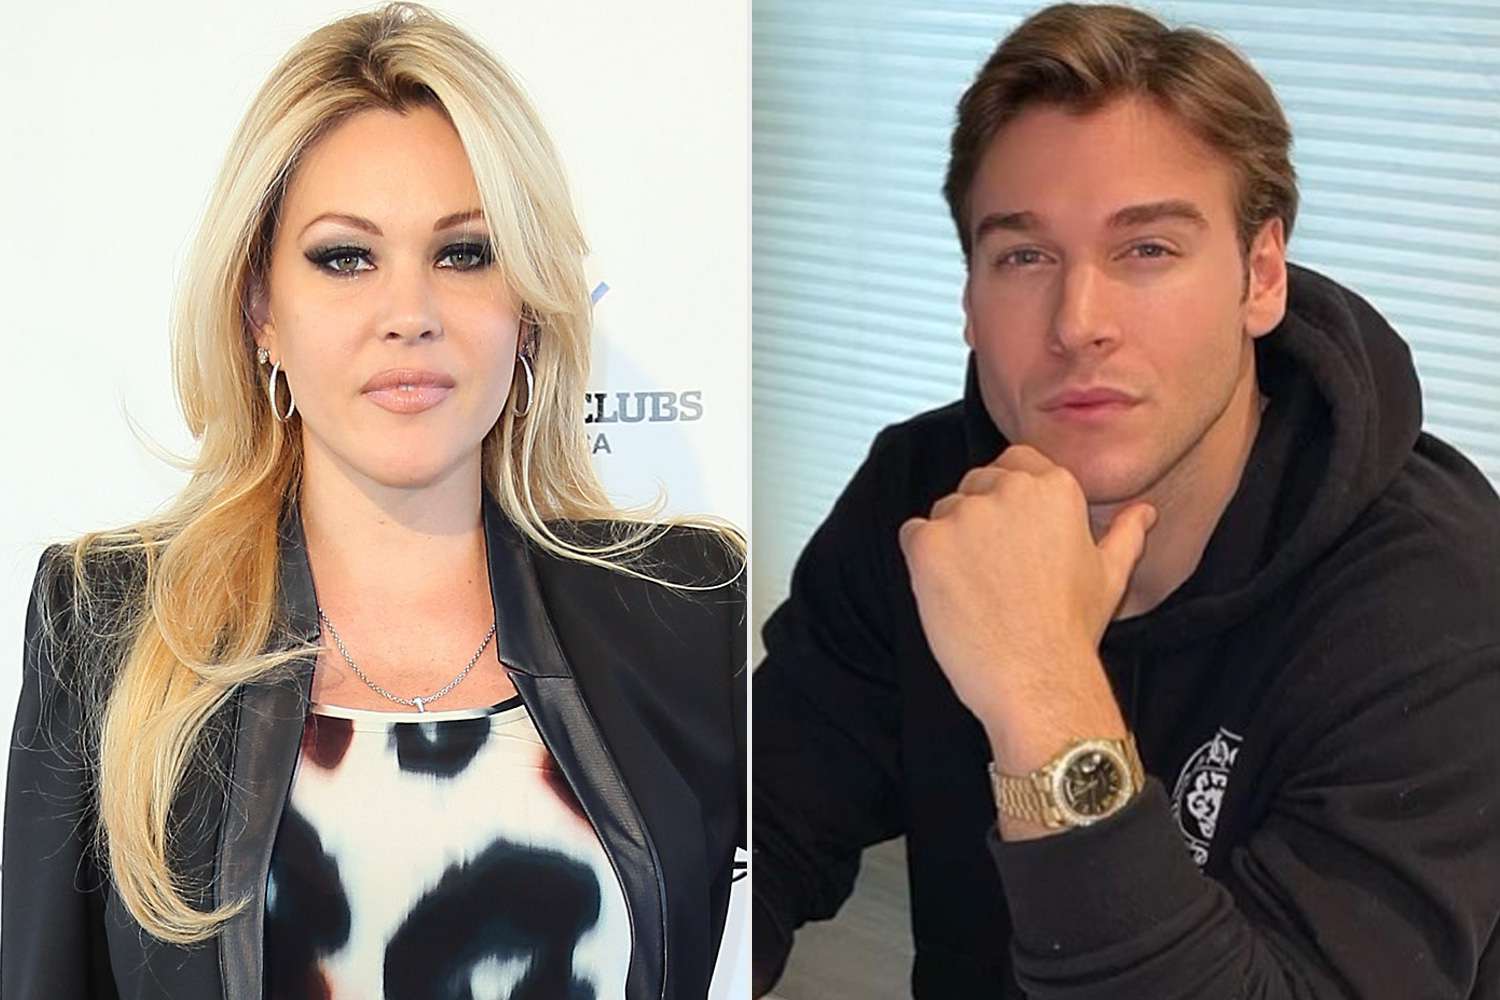 Shanna Moakler and Matthew Rondeau Spend Time Together After 'Domestic Disturbance' Call to Police